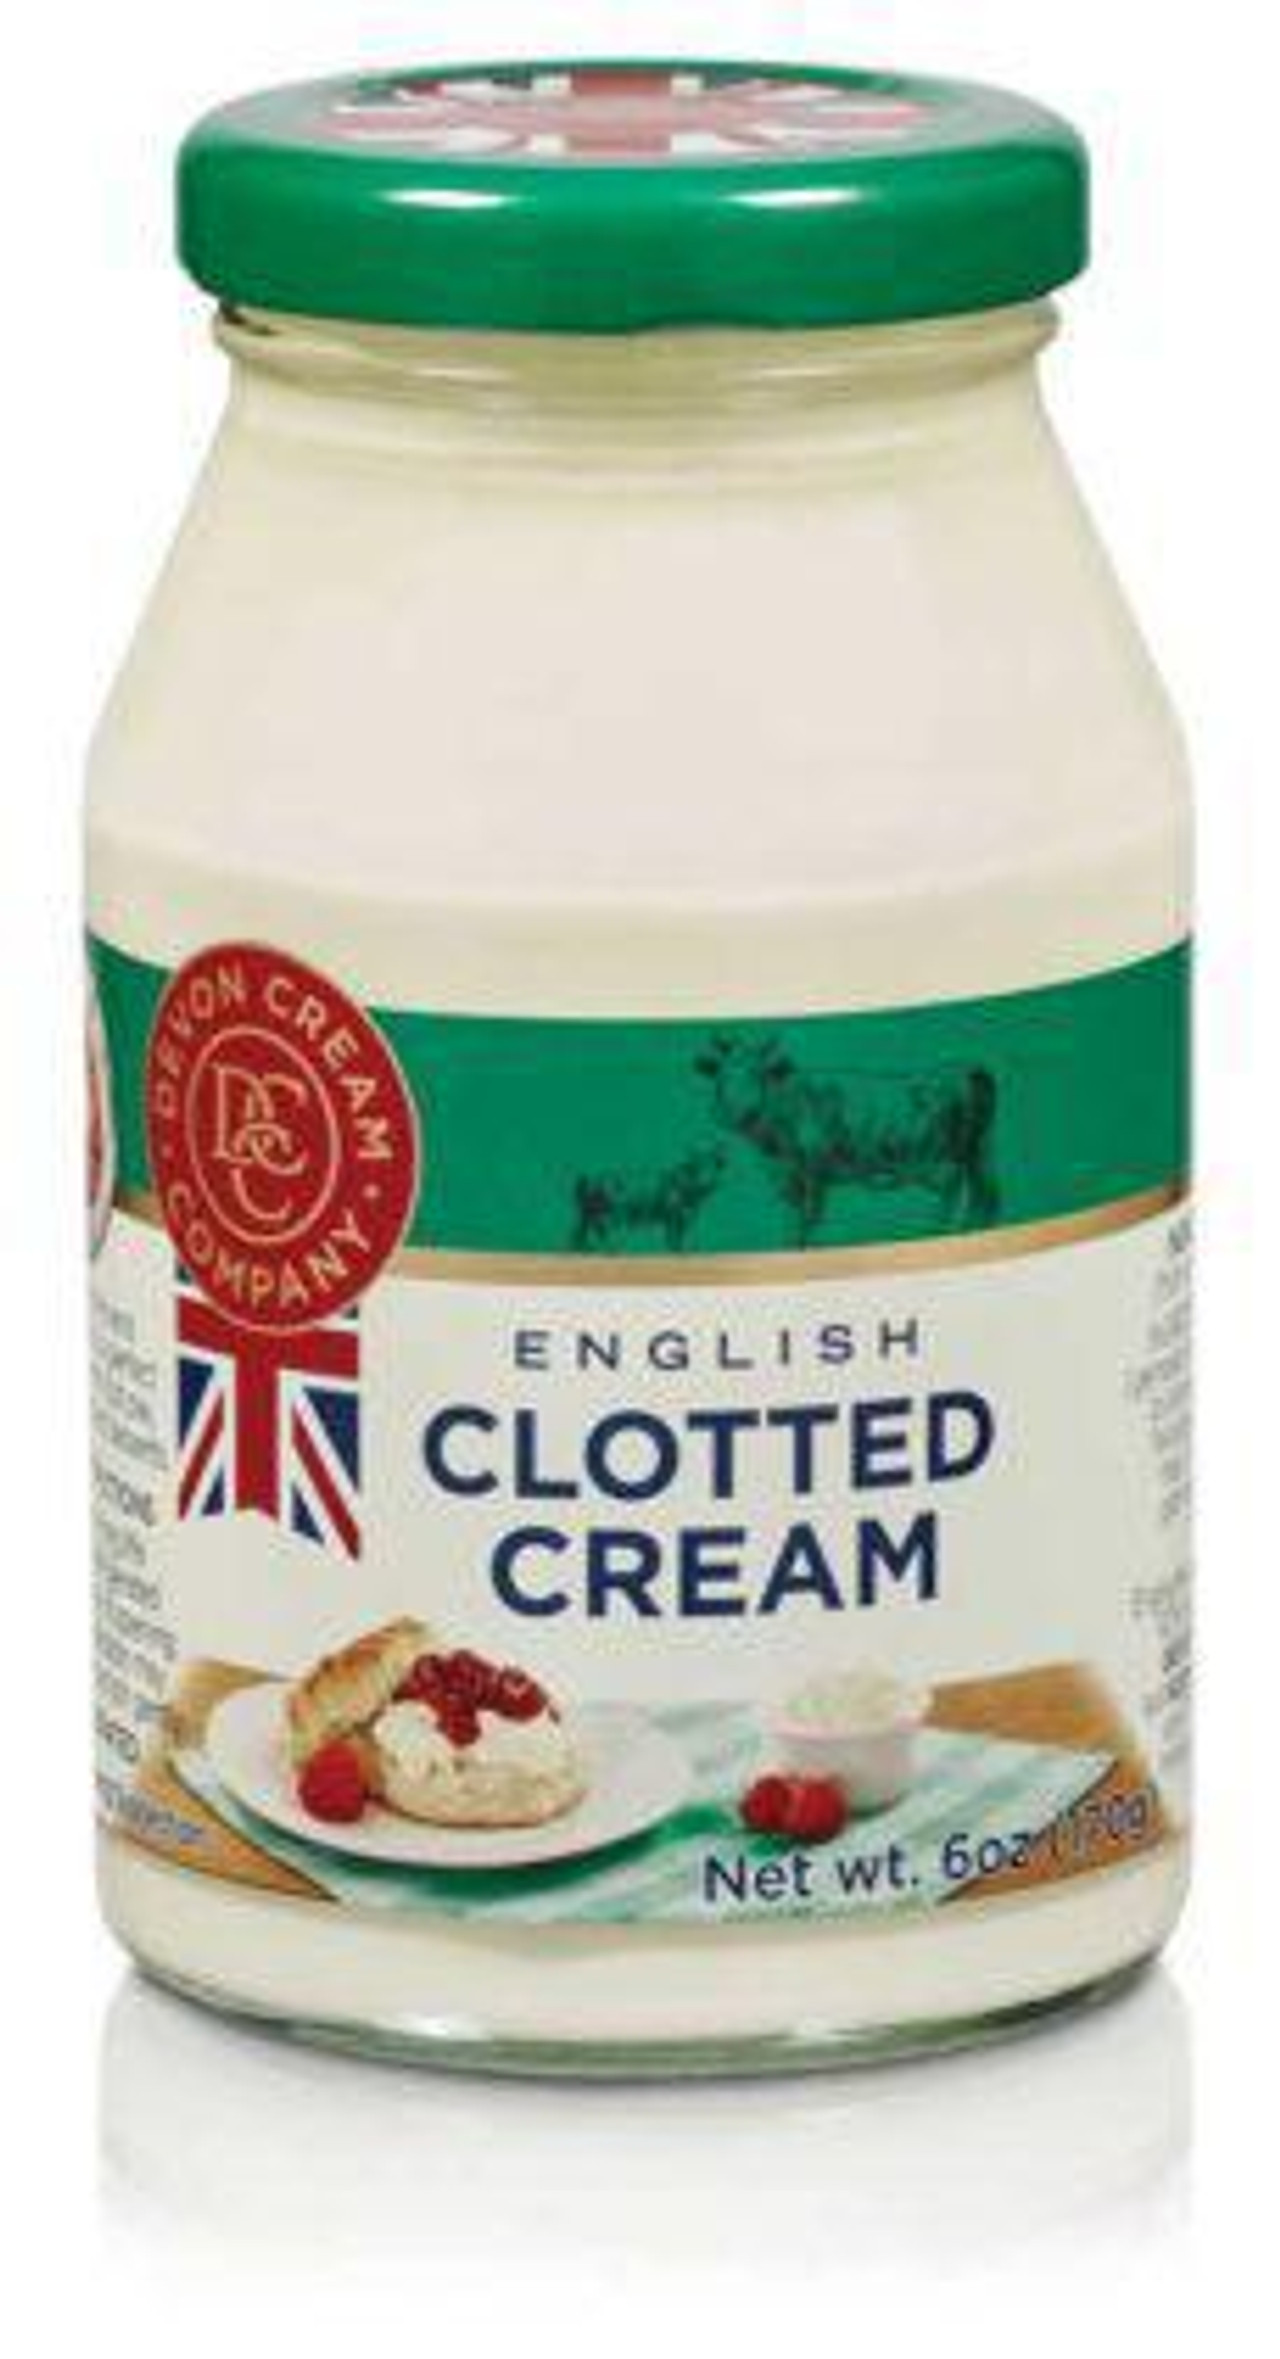 difference between clotted cream and double cream